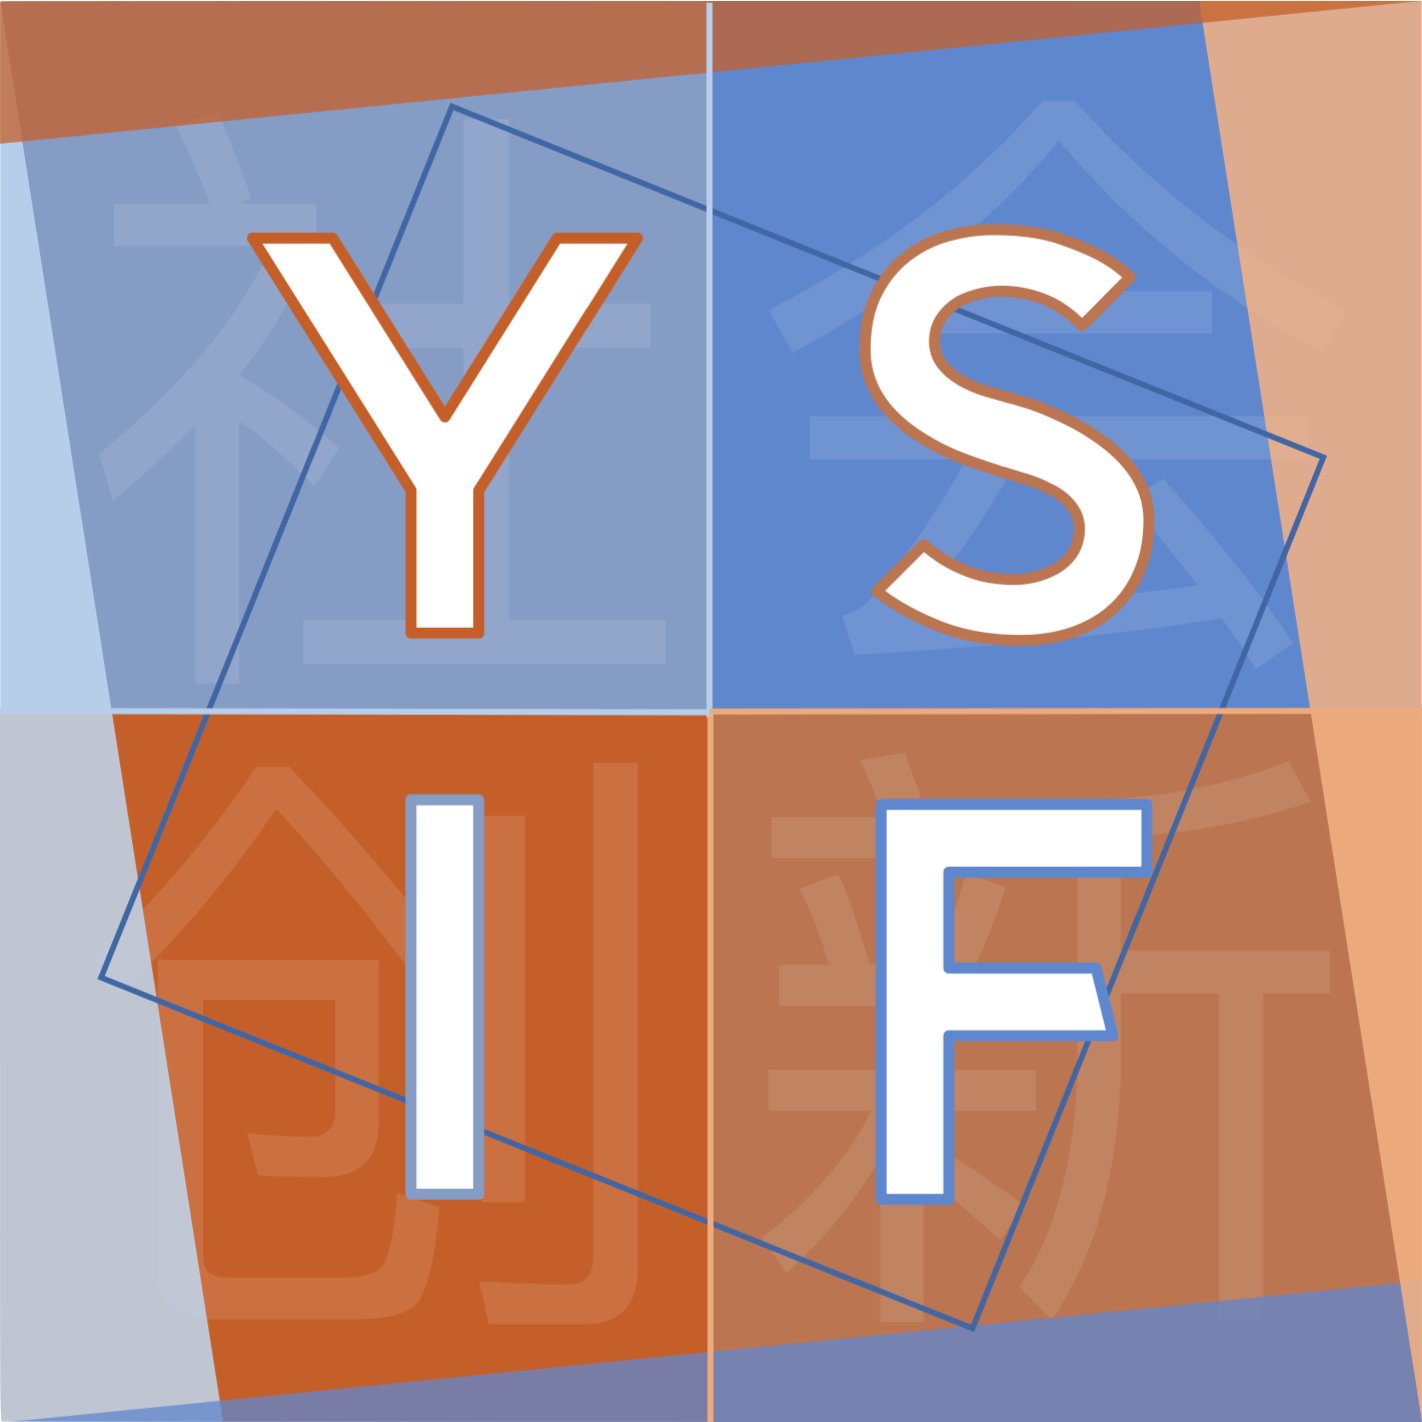 The Yenching Social Innovation Forum (YSIF) is an annual conference hosted by @YCAPKU each December in Beijing. @SDSNYouth partner, focused on the @UN #SDGs.